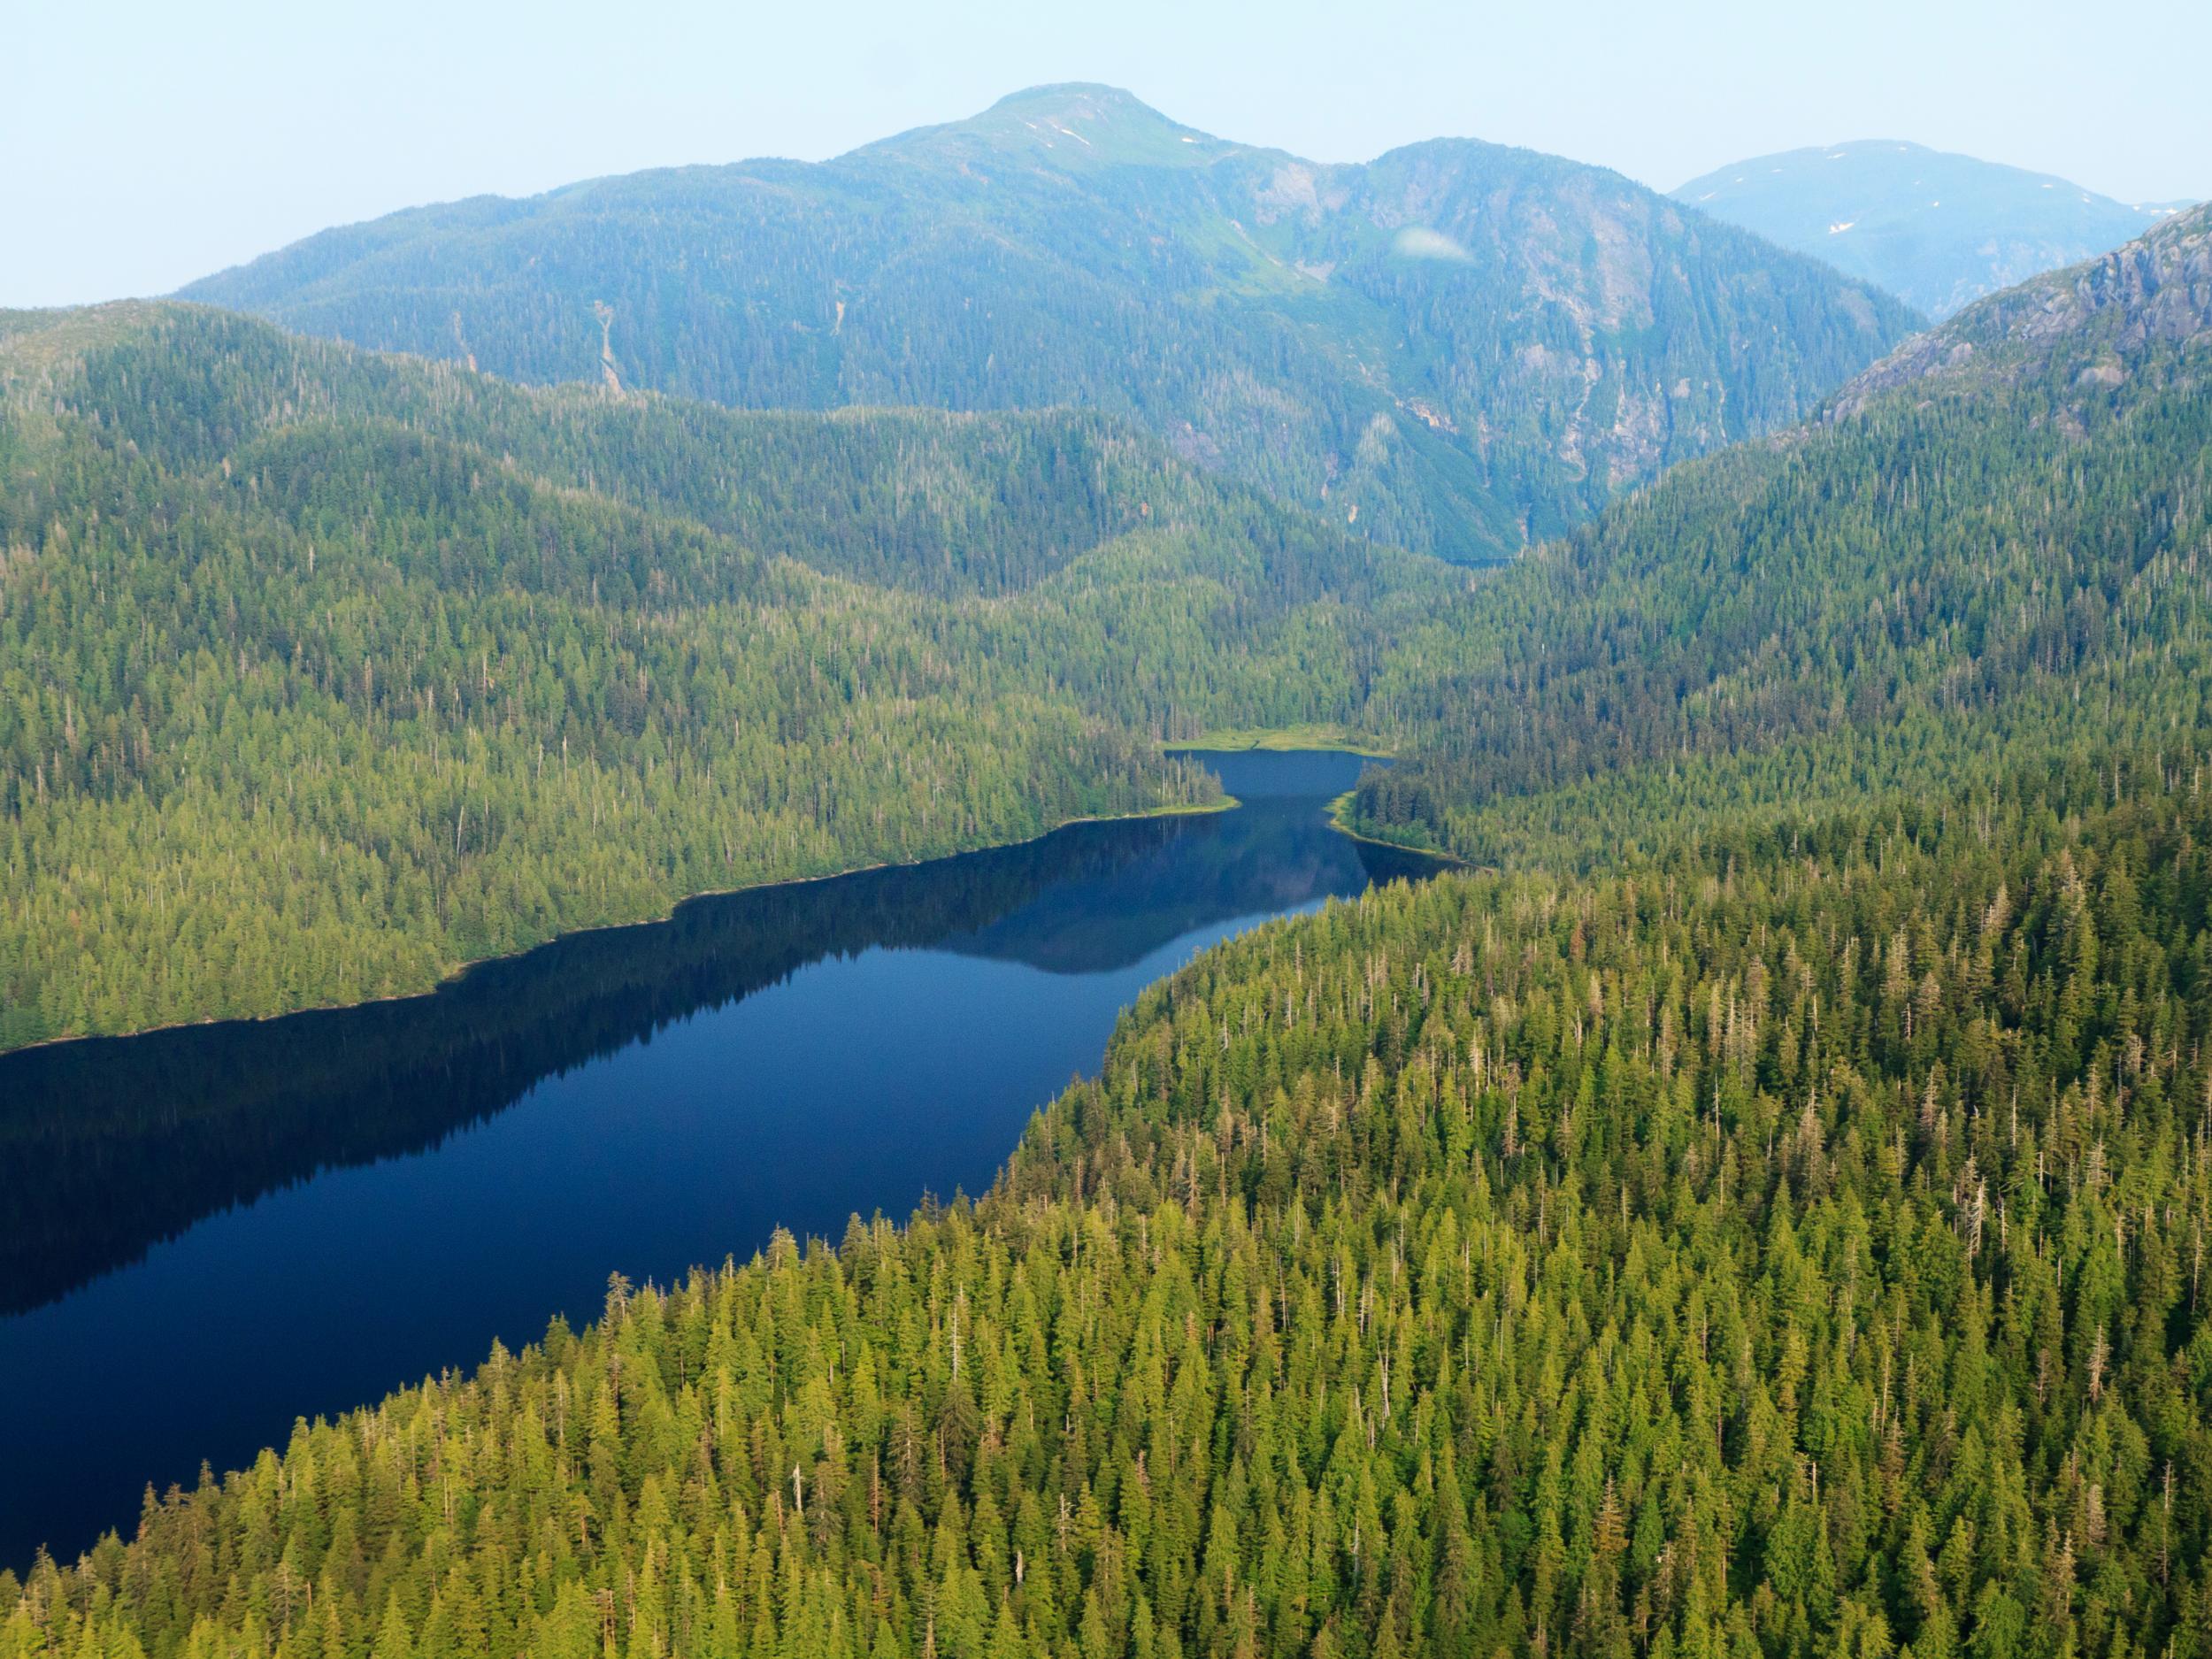 An aerial view of Tongass national forest in Alaska